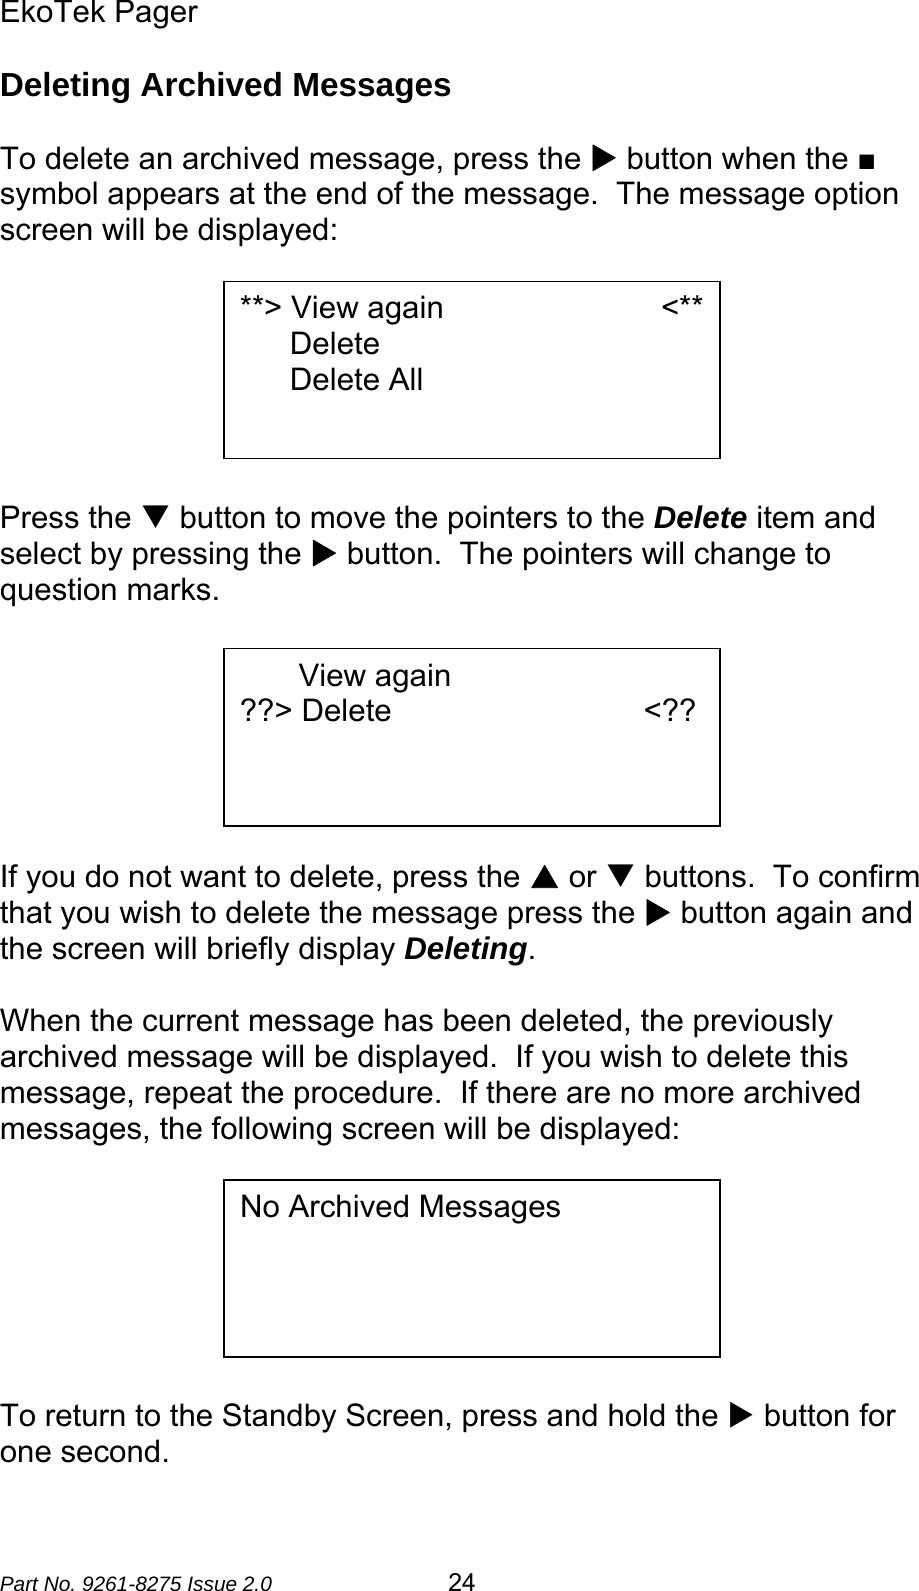 EkoTek Pager  Part No. 9261-8275 Issue 2.0   24 Deleting Archived Messages  To delete an archived message, press the X button when the ■ symbol appears at the end of the message.  The message option screen will be displayed:        Press the T button to move the pointers to the Delete item and select by pressing the X button.  The pointers will change to question marks.        If you do not want to delete, press the S or T buttons.  To confirm that you wish to delete the message press the X button again and the screen will briefly display Deleting.  When the current message has been deleted, the previously archived message will be displayed.  If you wish to delete this message, repeat the procedure.  If there are no more archived messages, the following screen will be displayed:        To return to the Standby Screen, press and hold the X button for one second. **&gt; View again                         &lt;**Delete Delete All    View again                         ??&gt; Delete                             &lt;??   No Archived Messages 